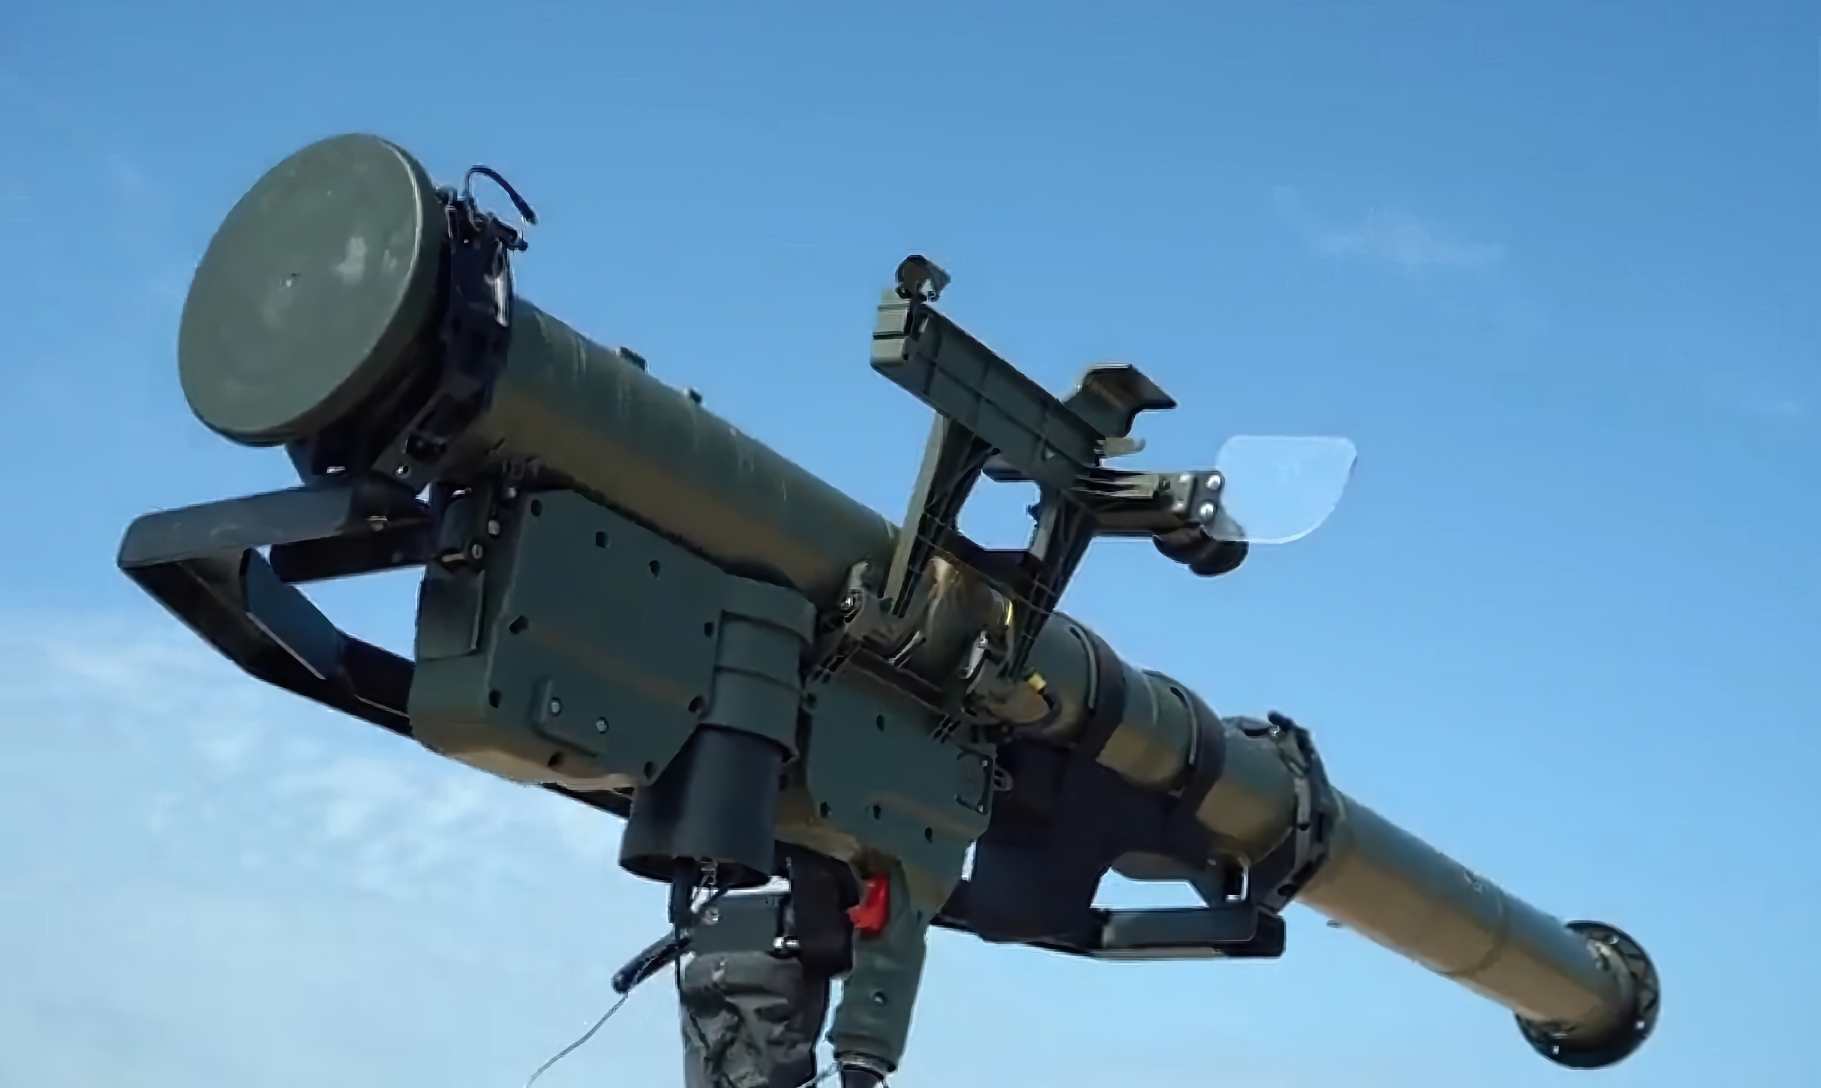 The Turkish Armed Forces received their first batch of SUNGUR man-portable air defense systems. It can identify and track targets